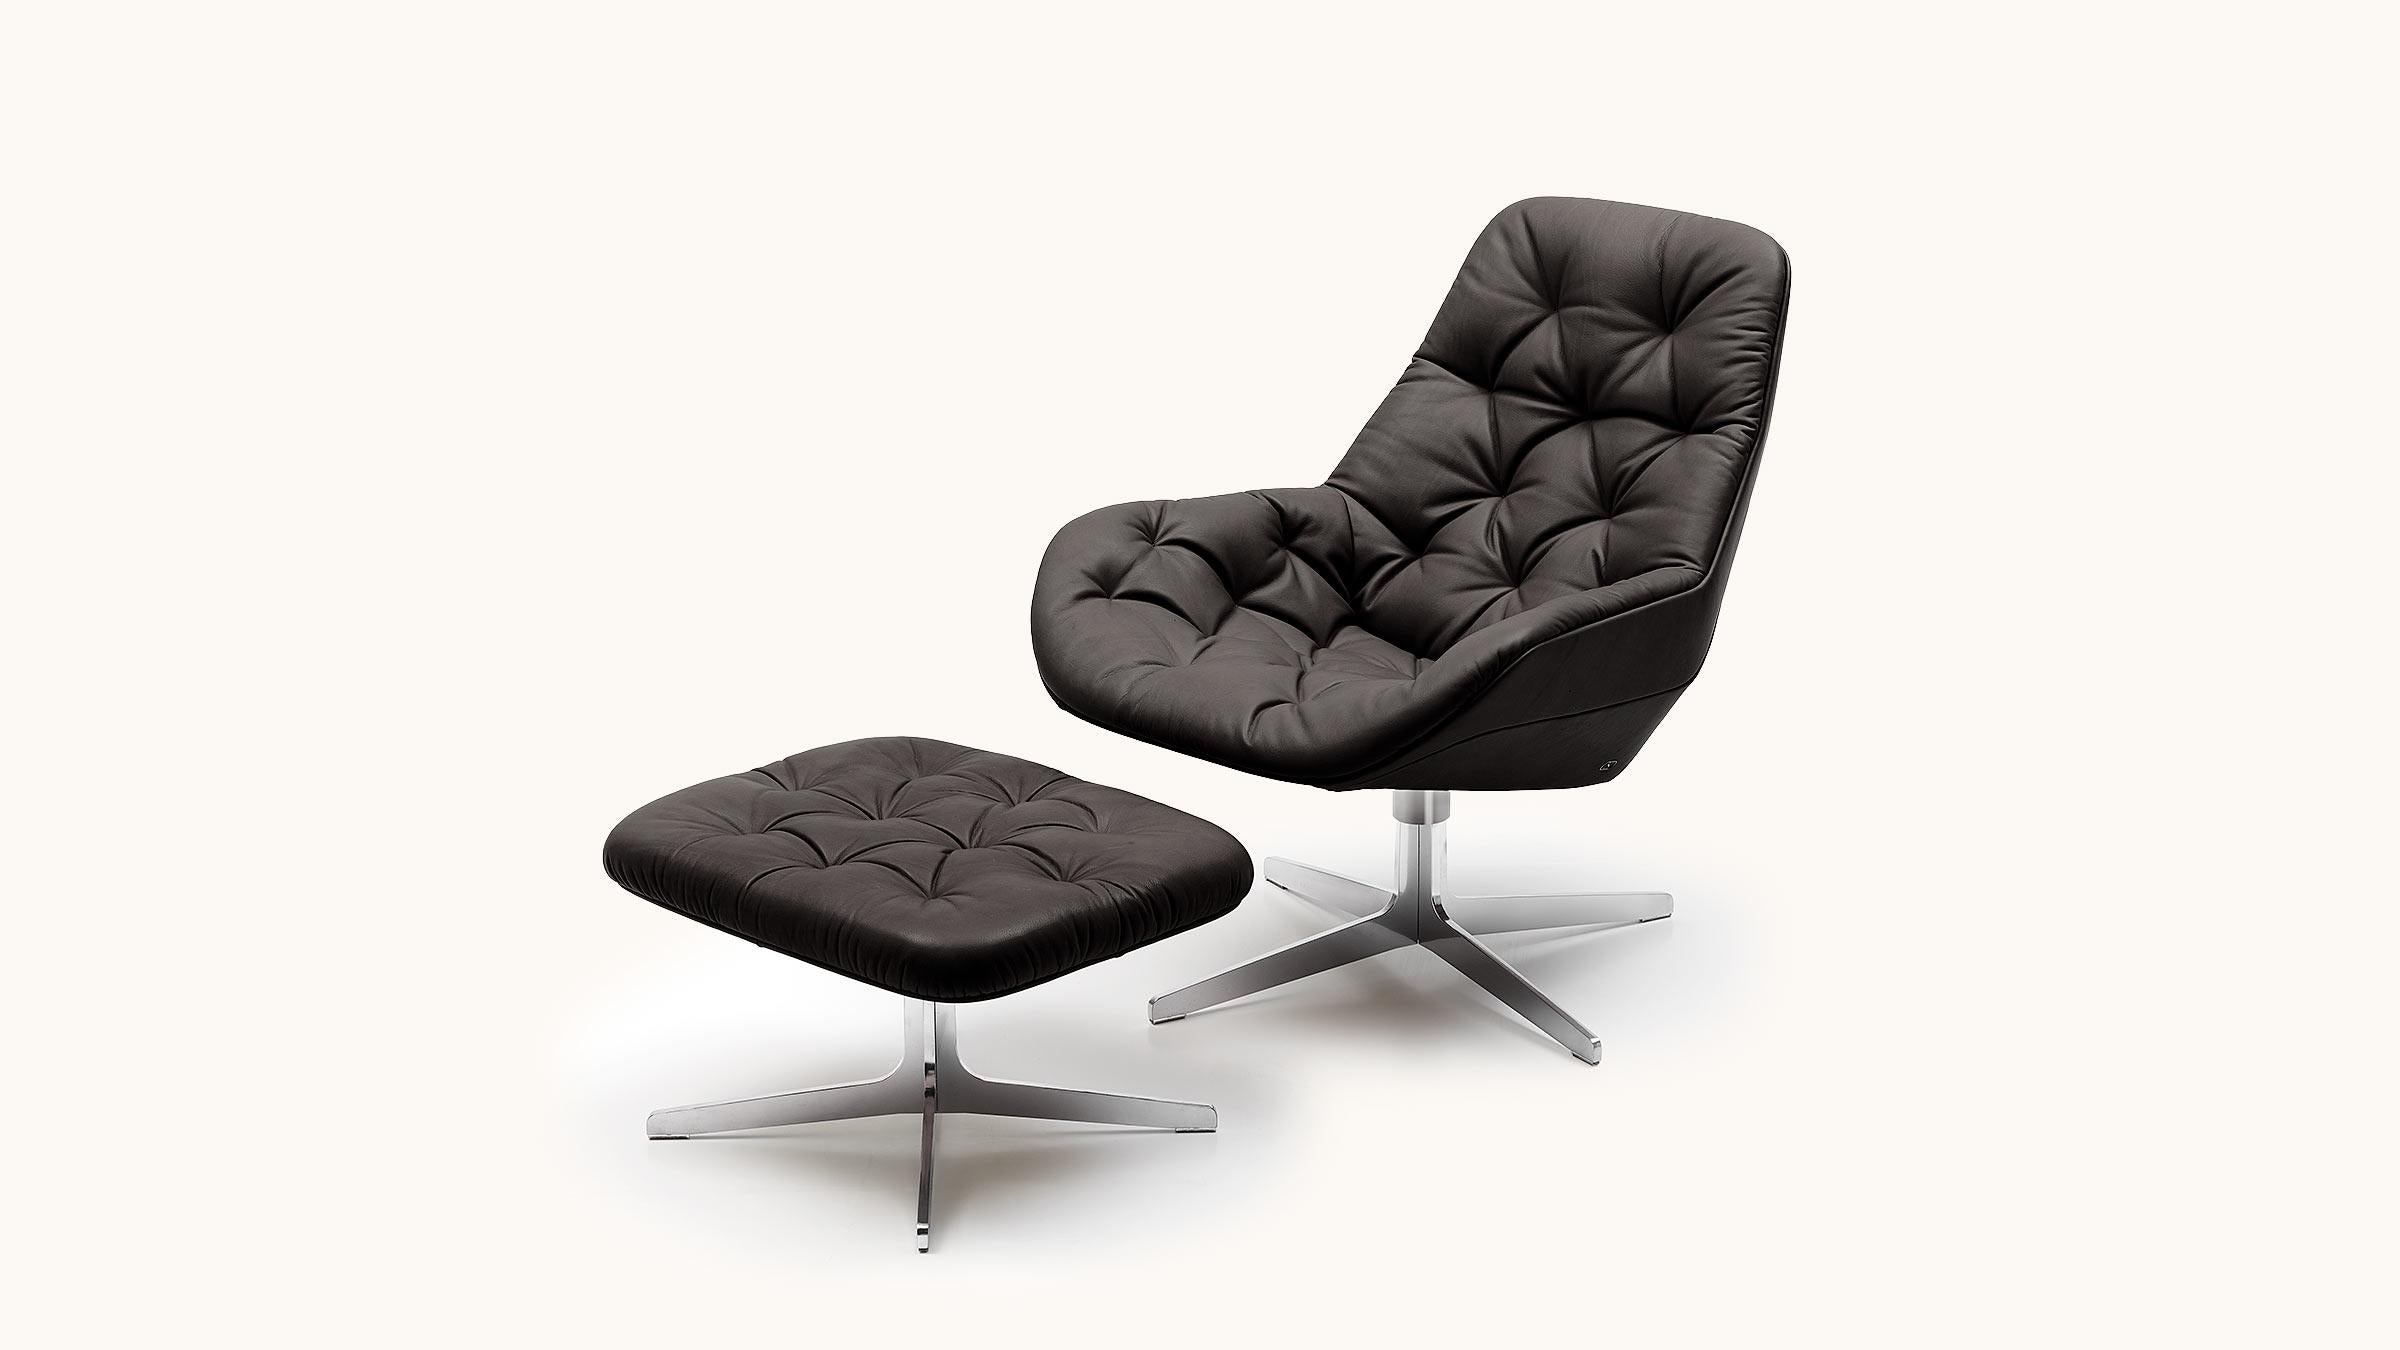 Sit the way you would sit in a racing car. Minimalist, streamlined lan guage of design for maximum seating comfort: sitting in the lounge chair is like sitting in a quick, sleek speedster. The planeness with the circum ferential edges gives the